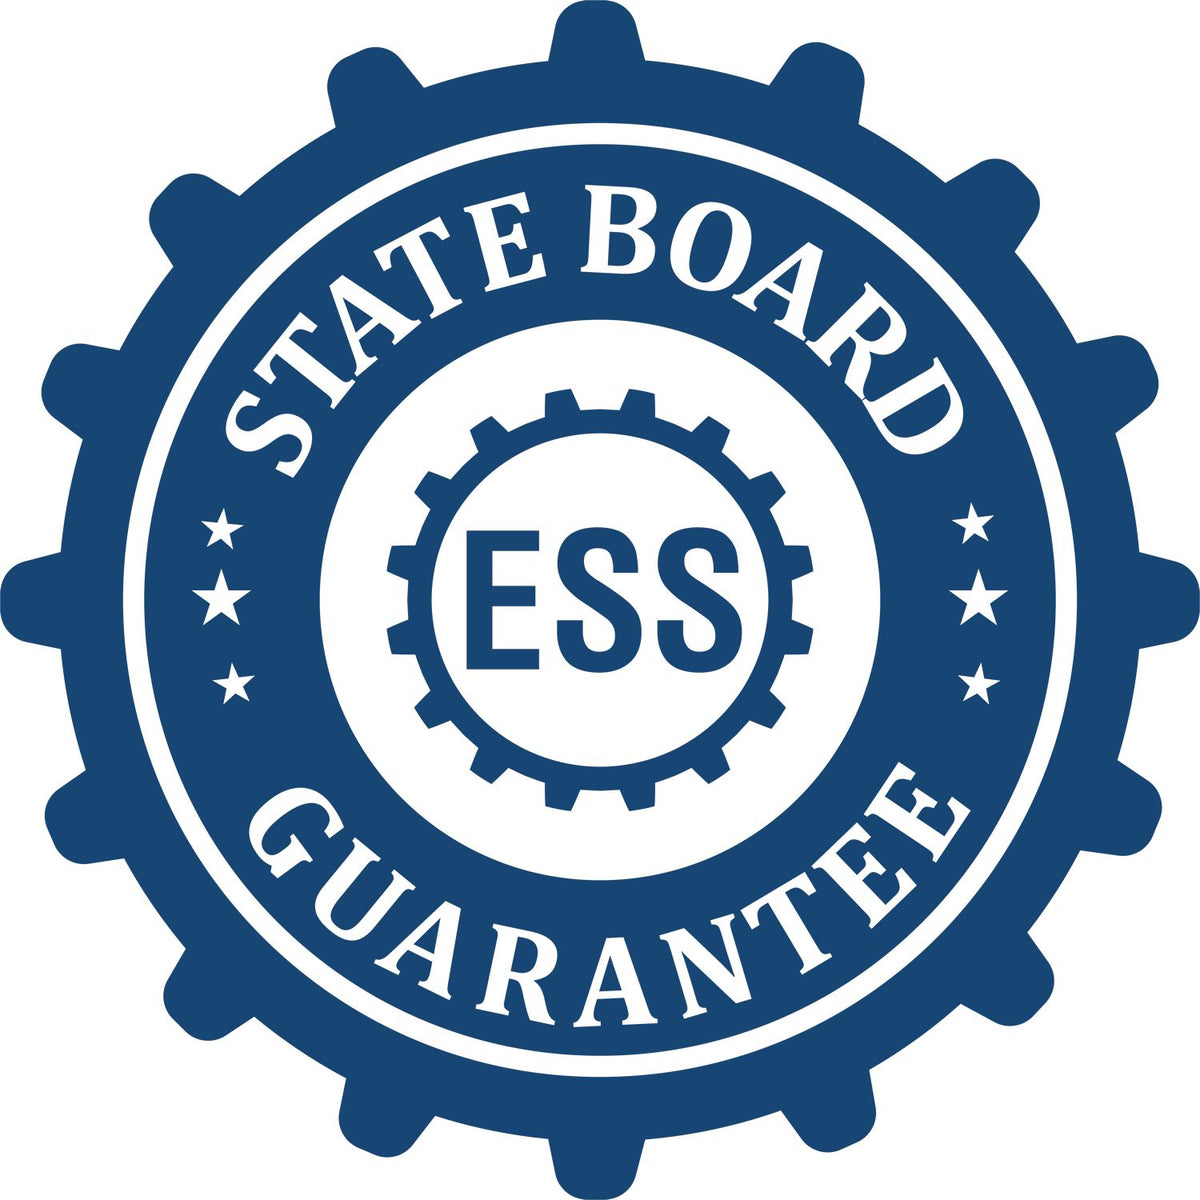 An emblem in a gear shape illustrating a state board guarantee for the Massachusetts Desk Surveyor Seal Embosser product.